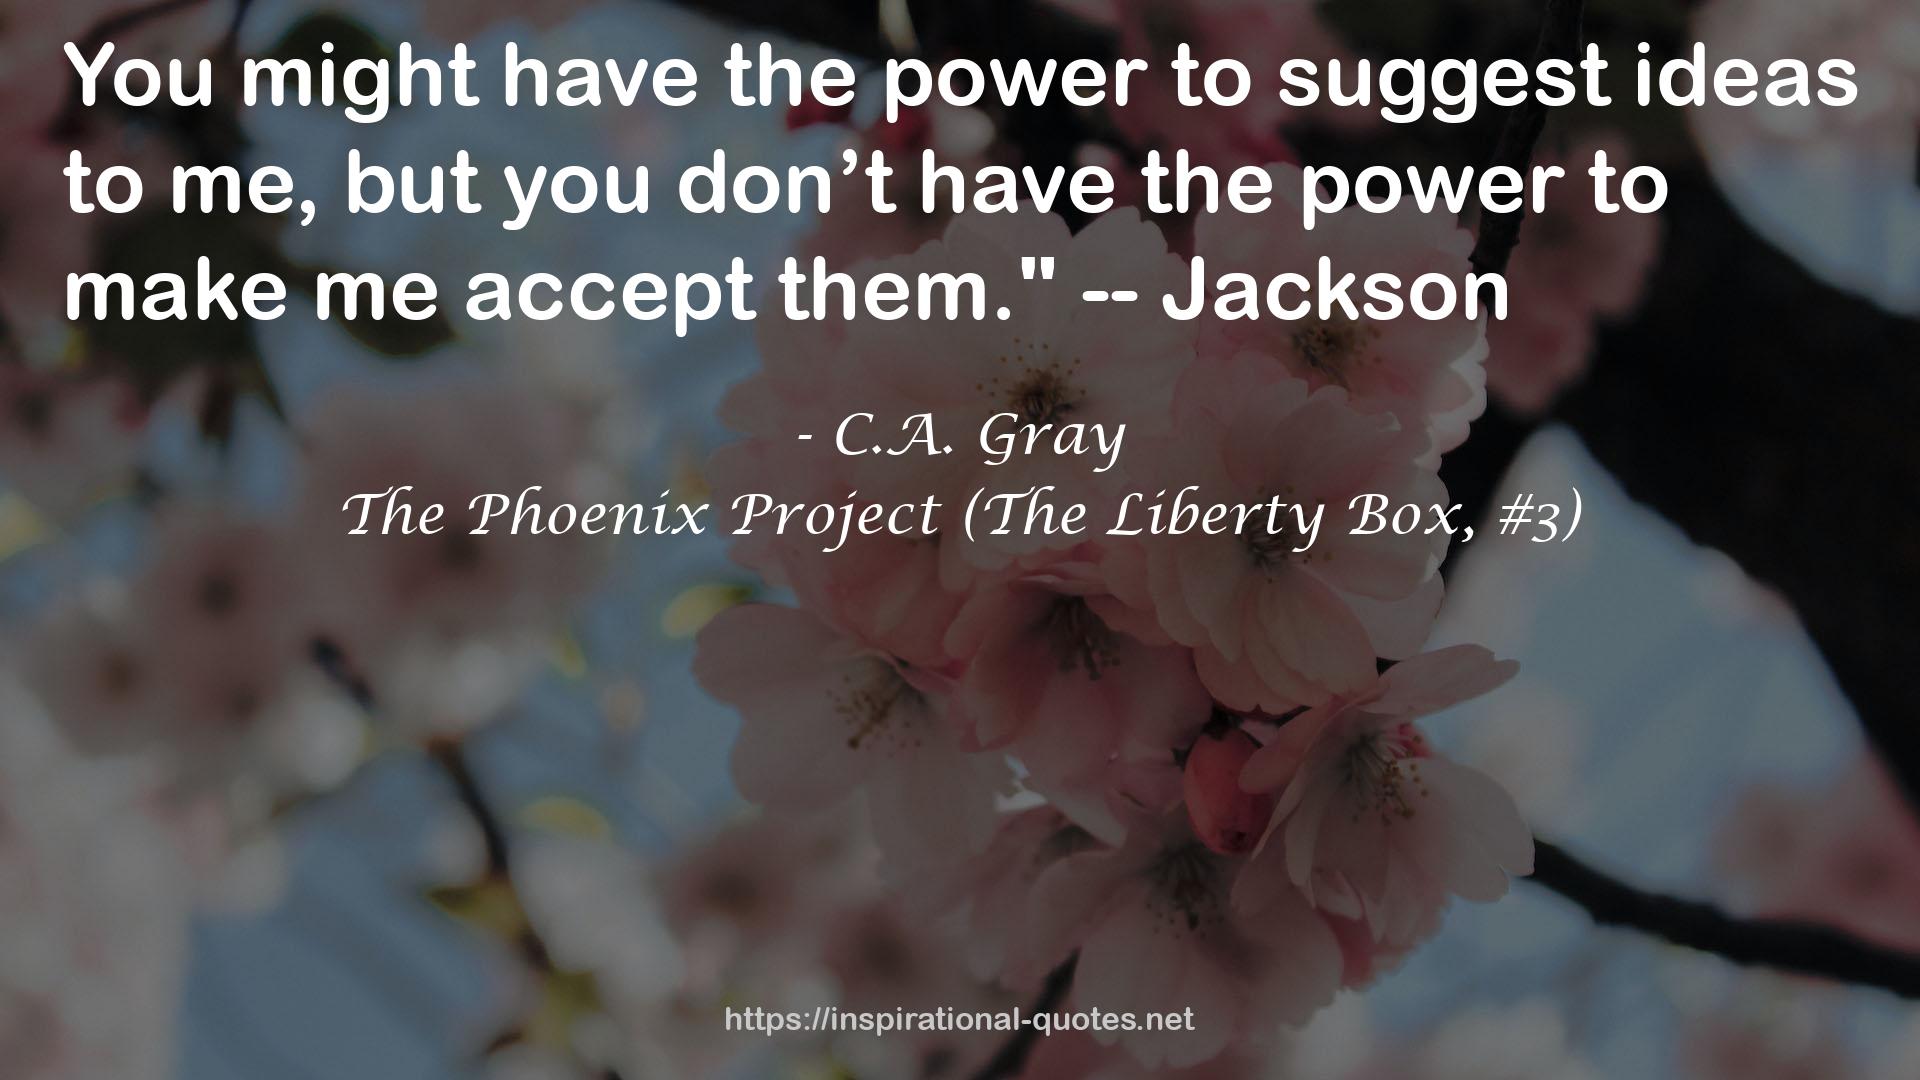 The Phoenix Project (The Liberty Box, #3) QUOTES